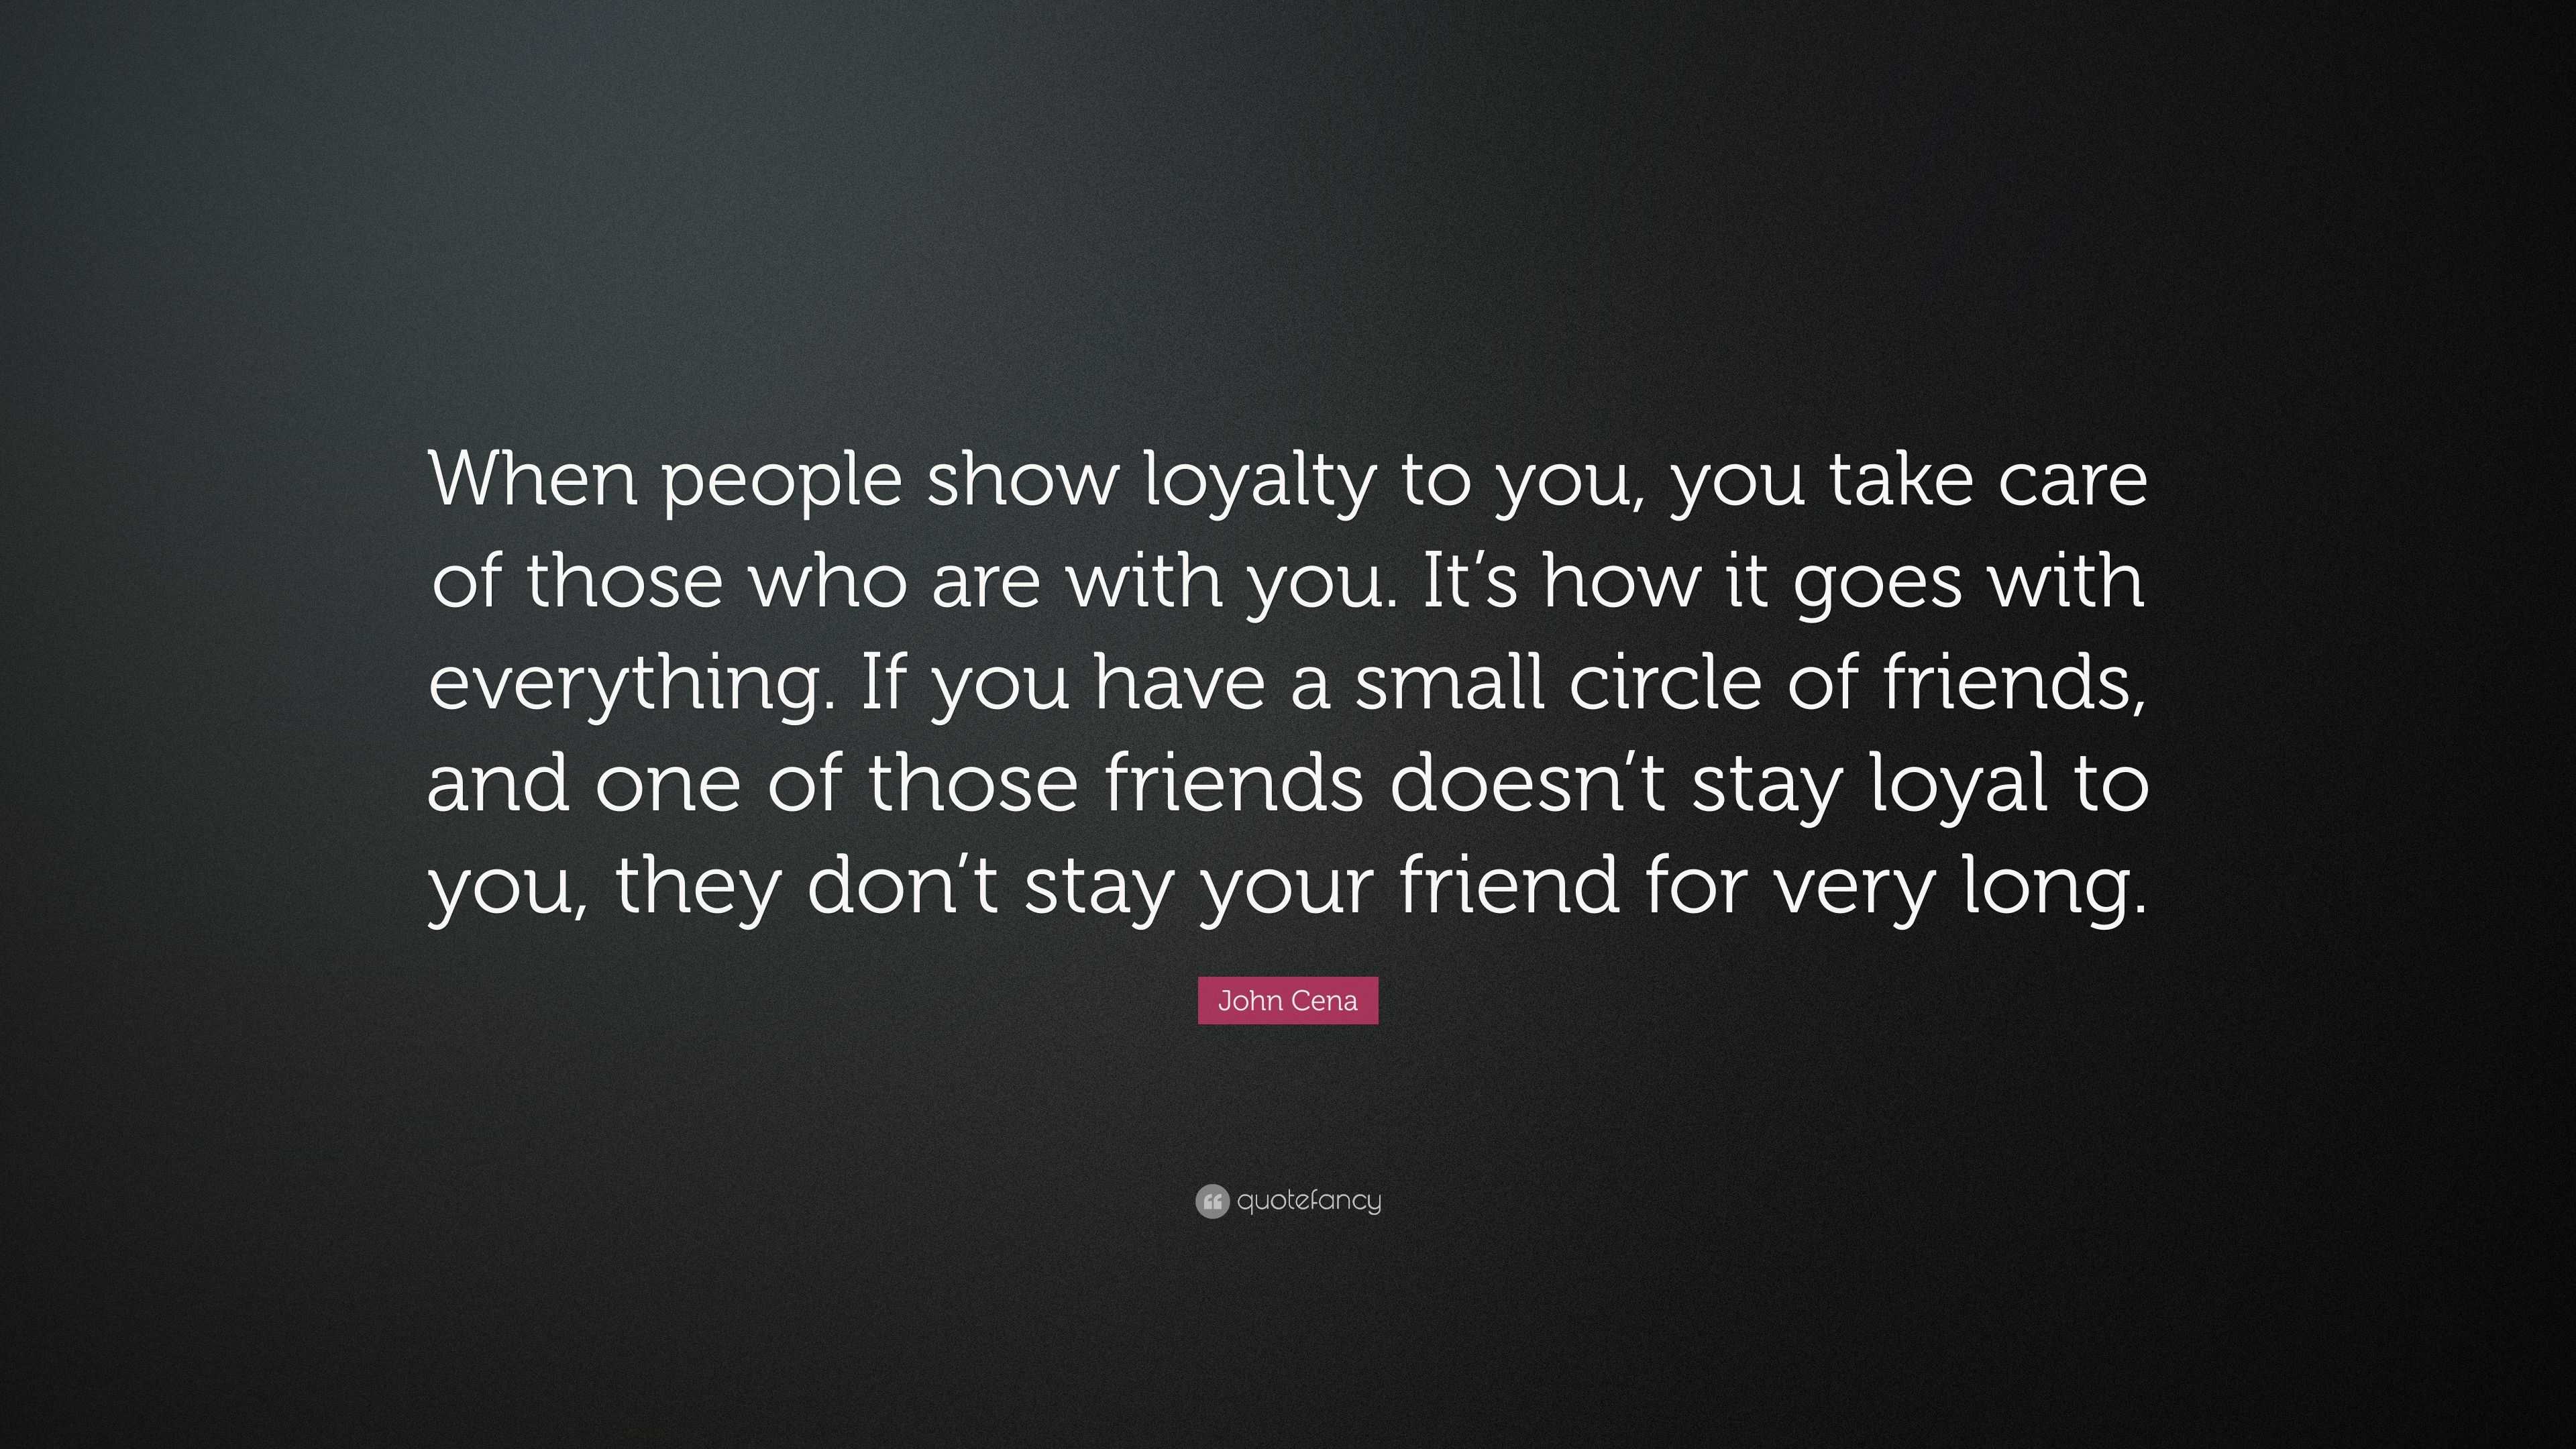 When people show loyalty to you, you take care of those who are with you. 